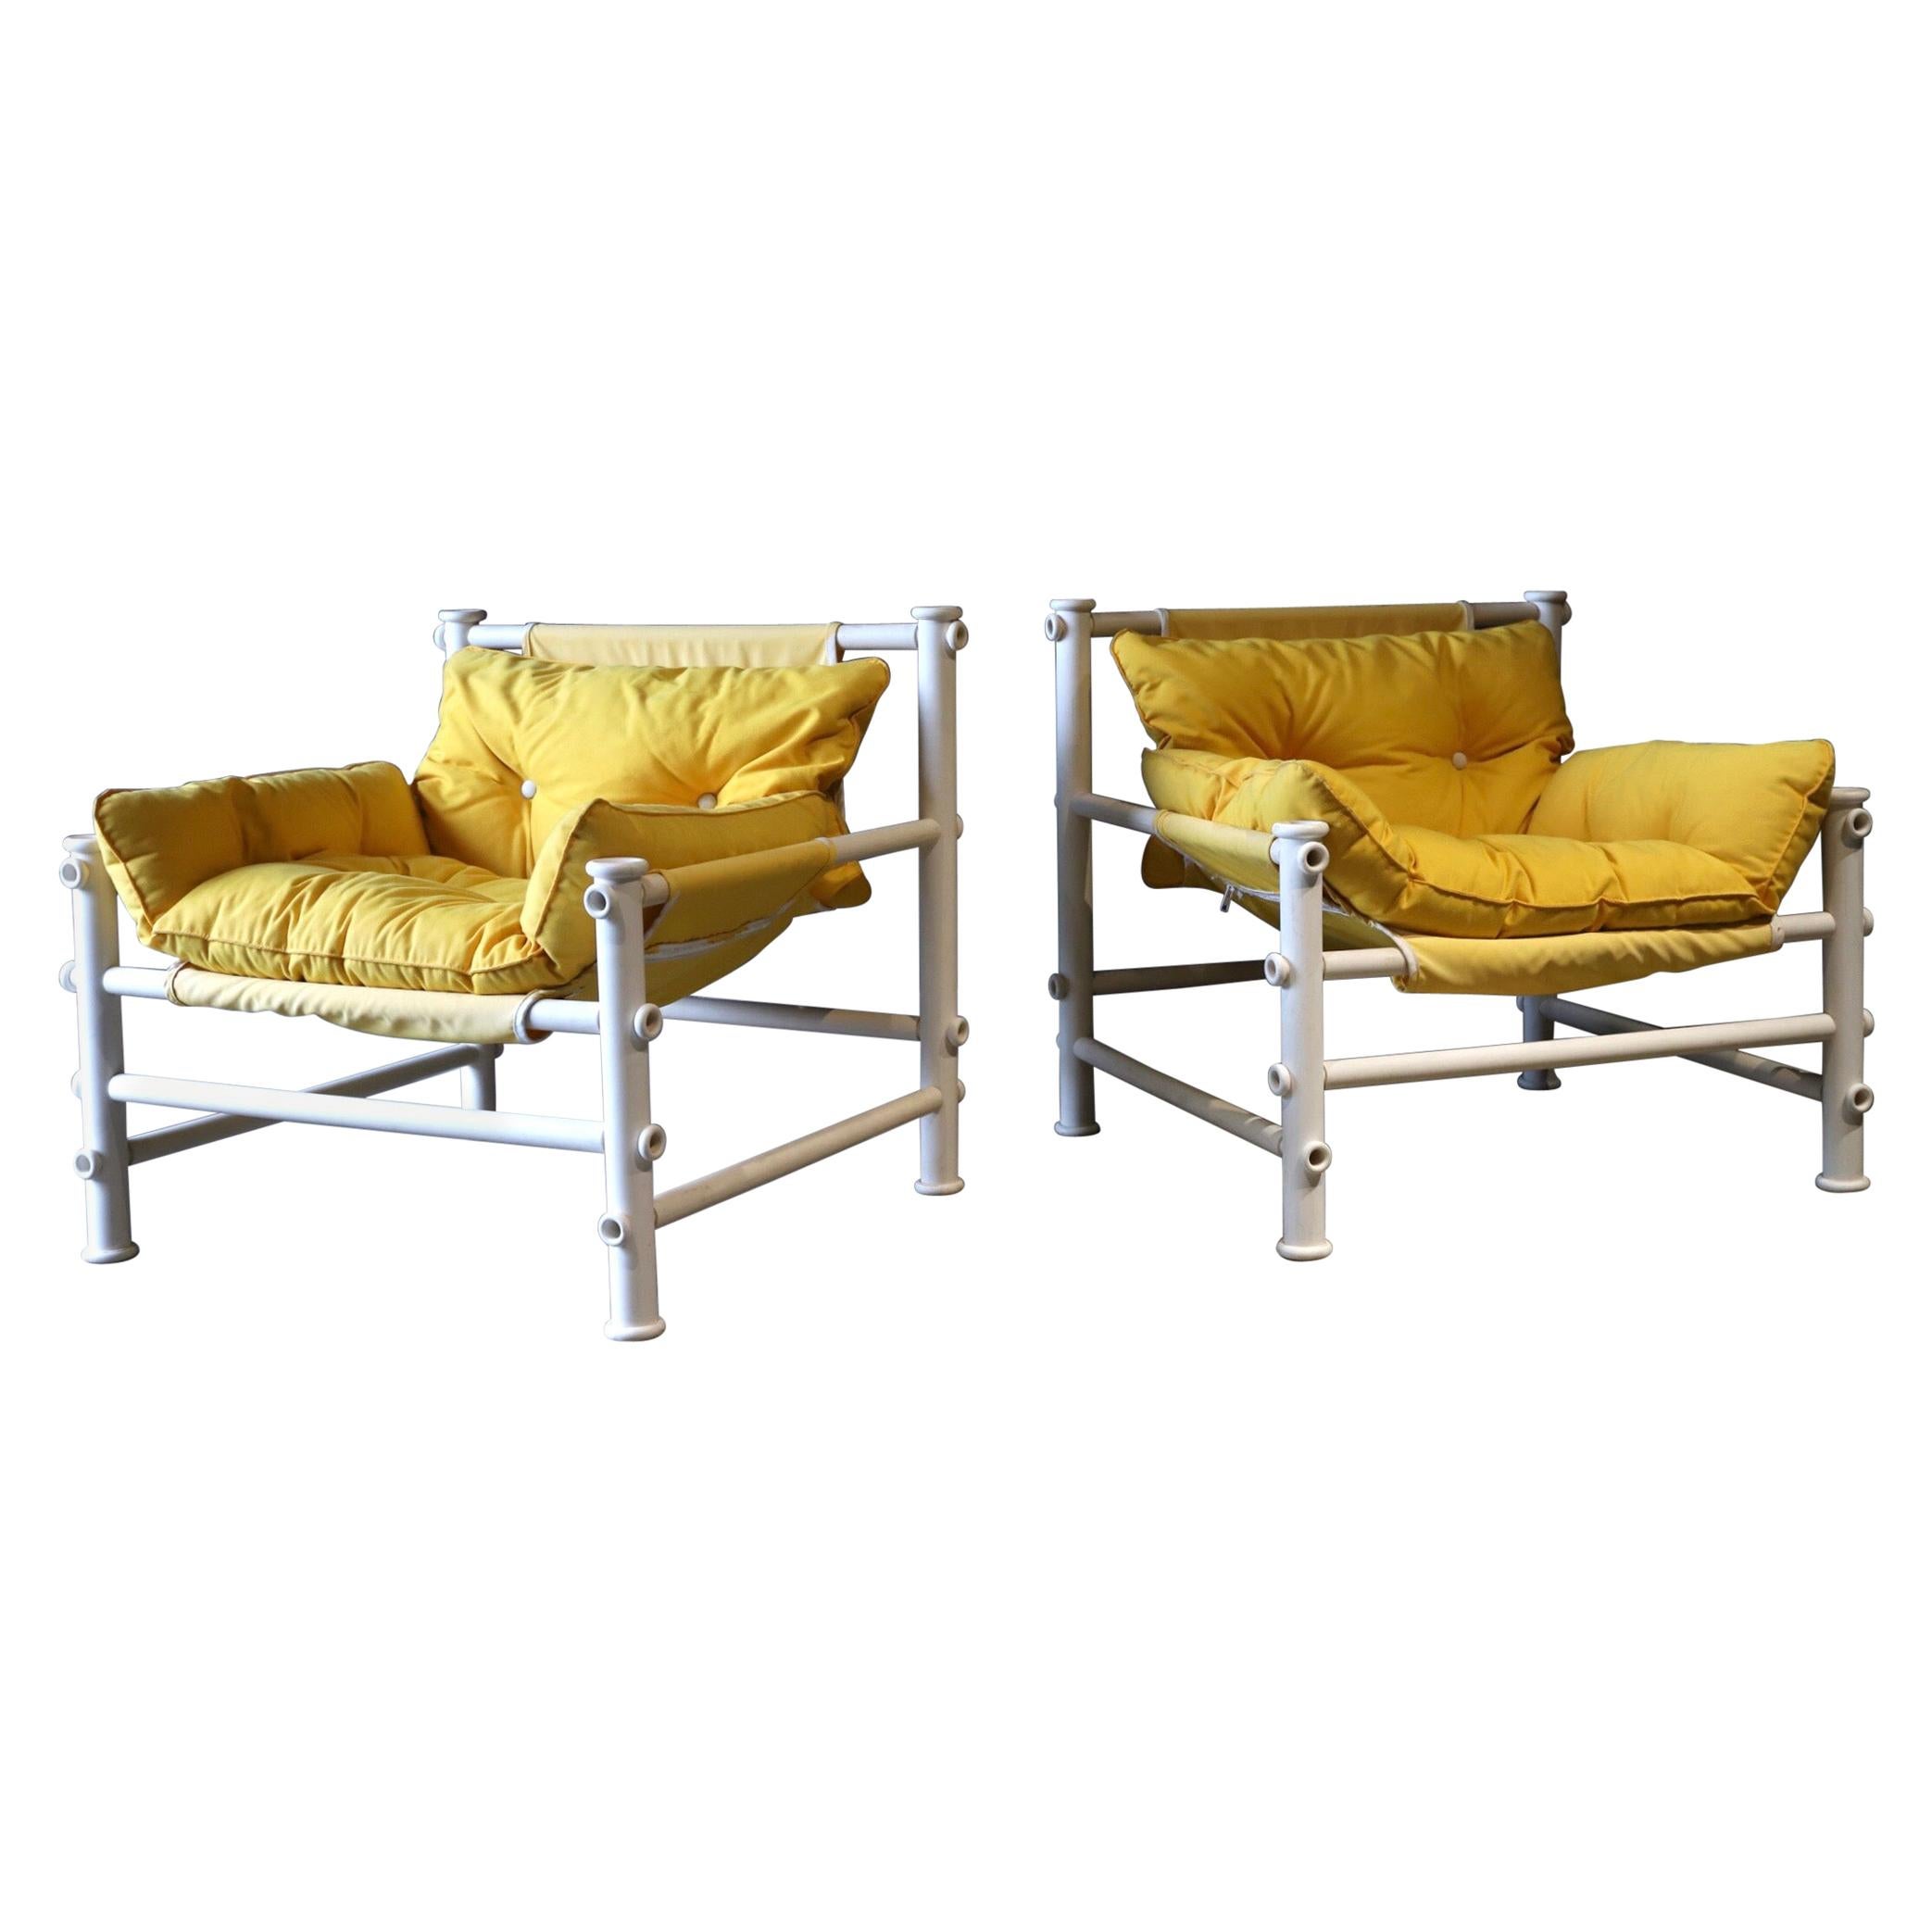 Outdoor Lounge Chairs by Jerry Johnson Landes PVC Idyllwild